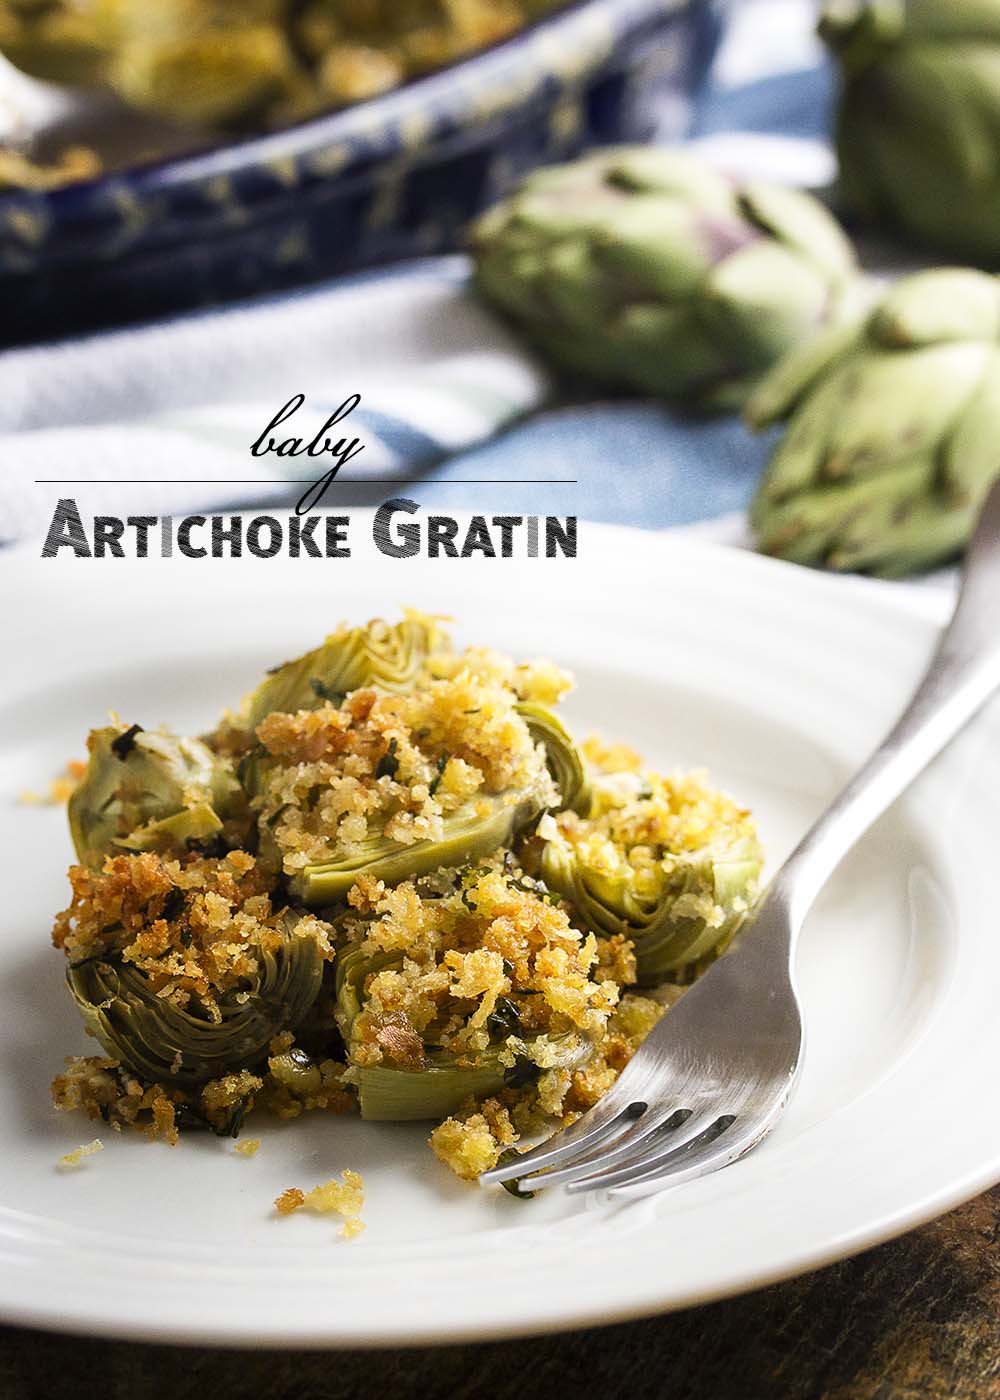 Want to know how to cook baby artichokes? In this easy recipe baby artichokes are trimmed up, topped with parsleyed bread crumbs and made into a baked artichoke gratin. Great holiday dish! | justalittlebitofbacon.com